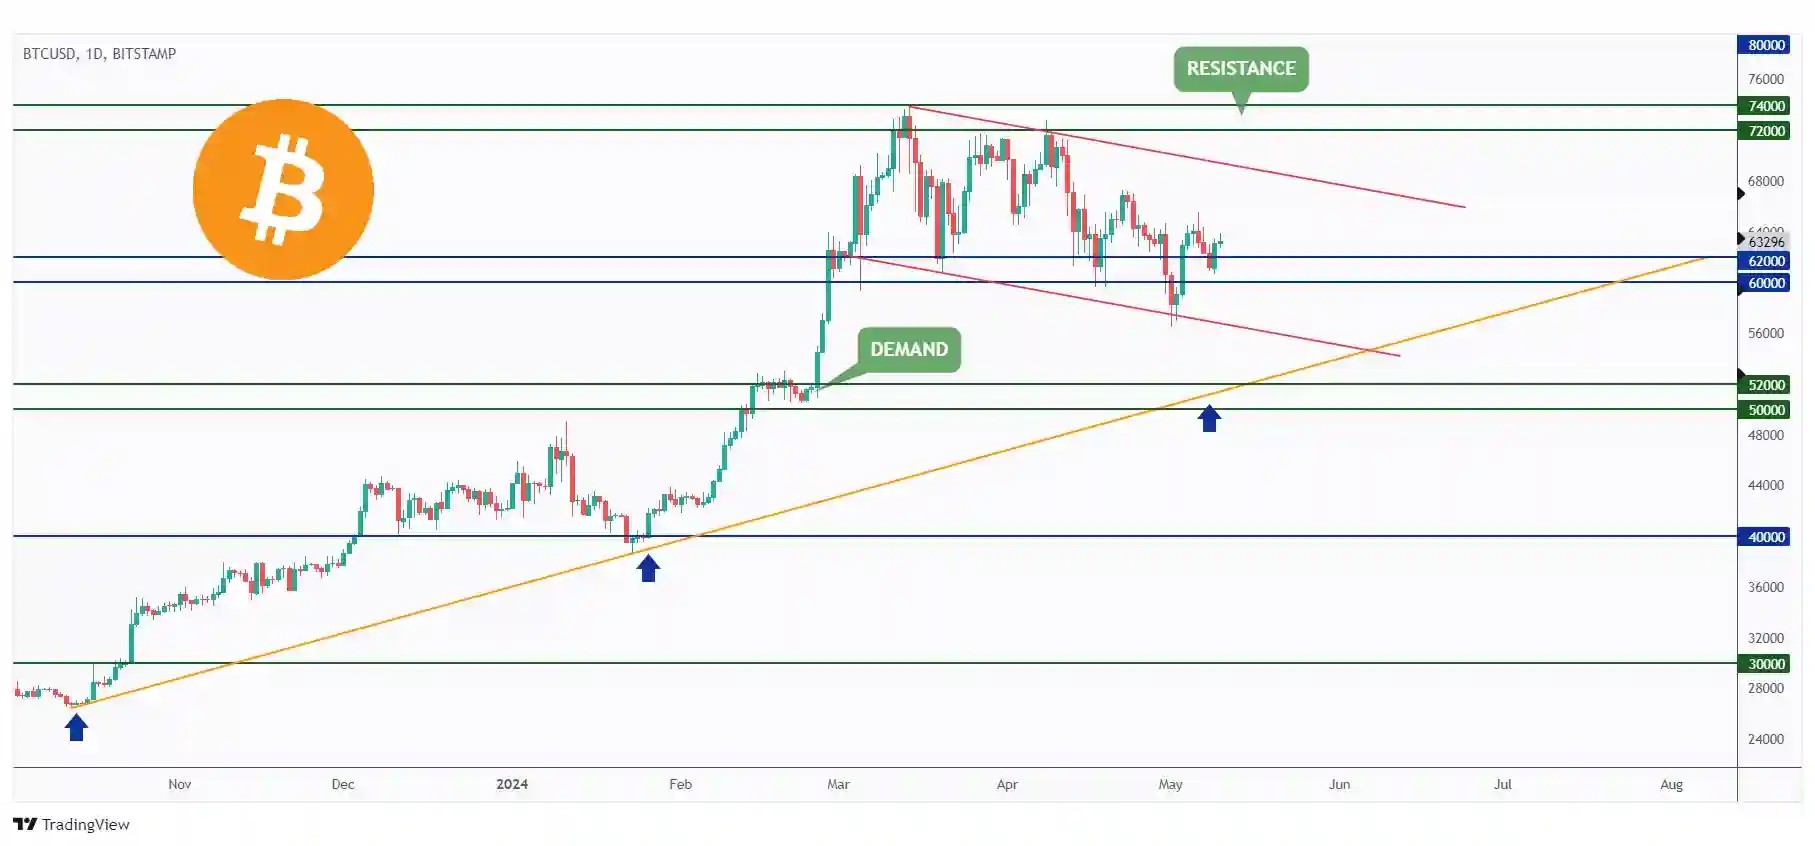 BTC daily chart overall bearish medium-term trading within the falling wedge pattern and currently rejecting the $60,000 - $62,000 support zone.